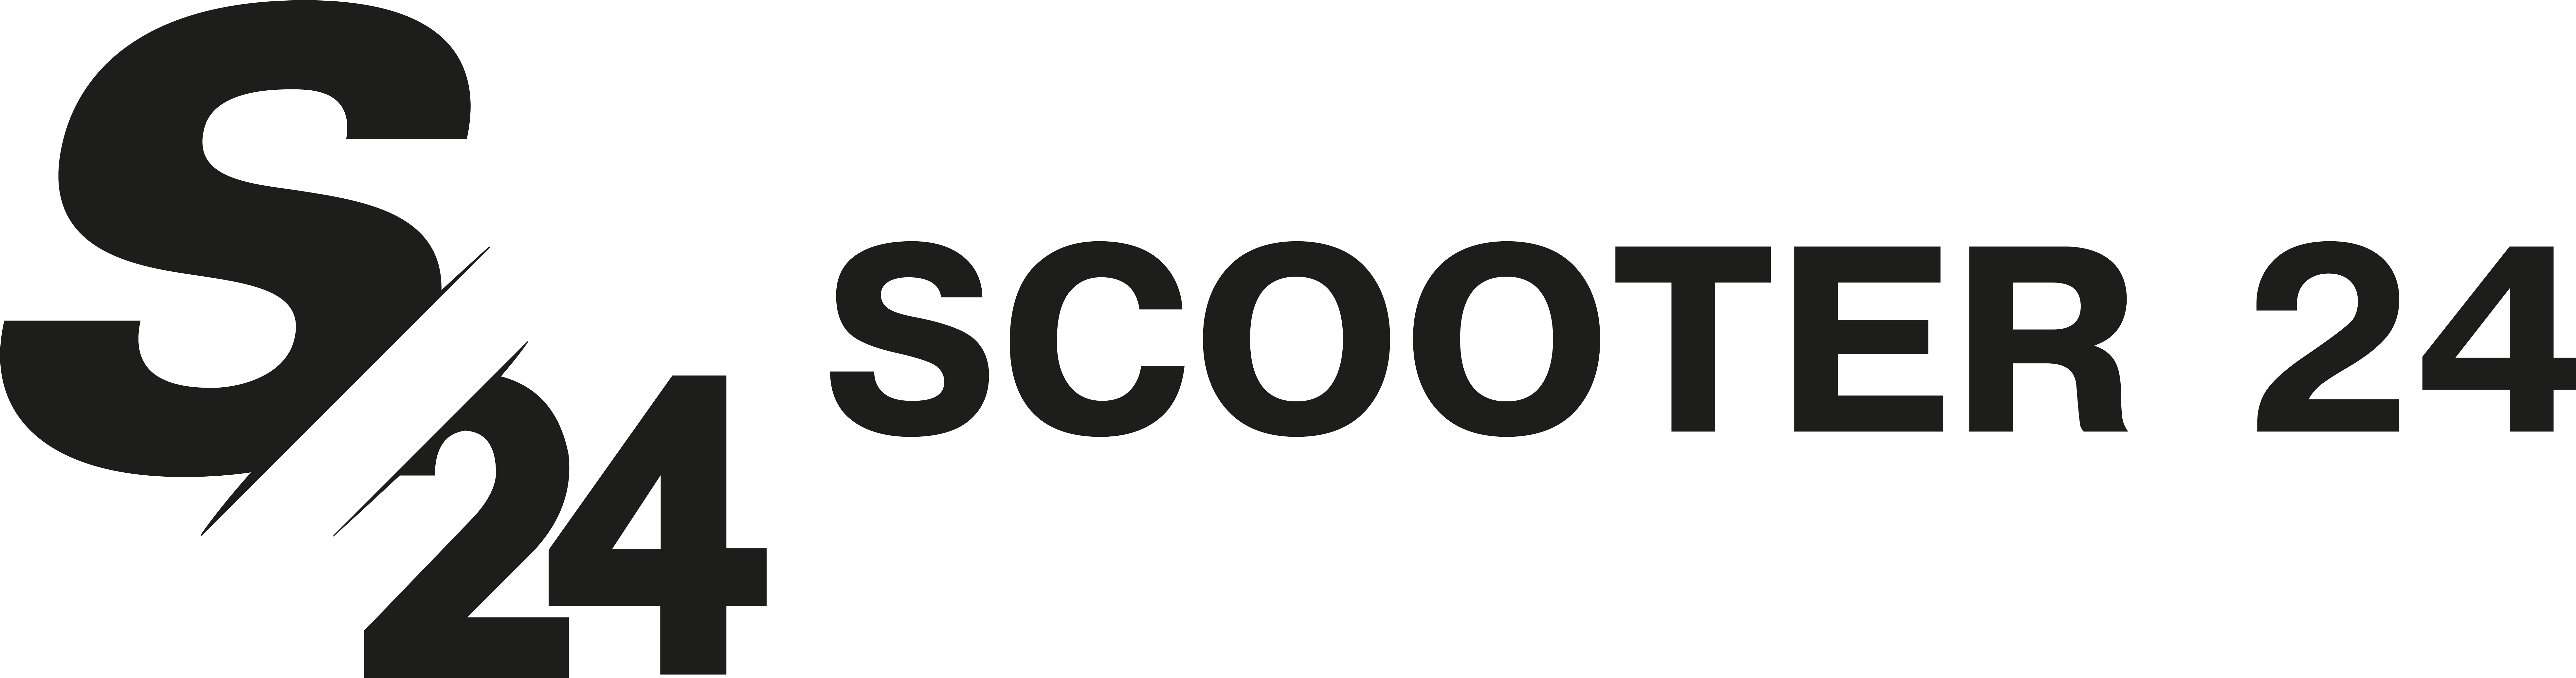 Scooter 24 